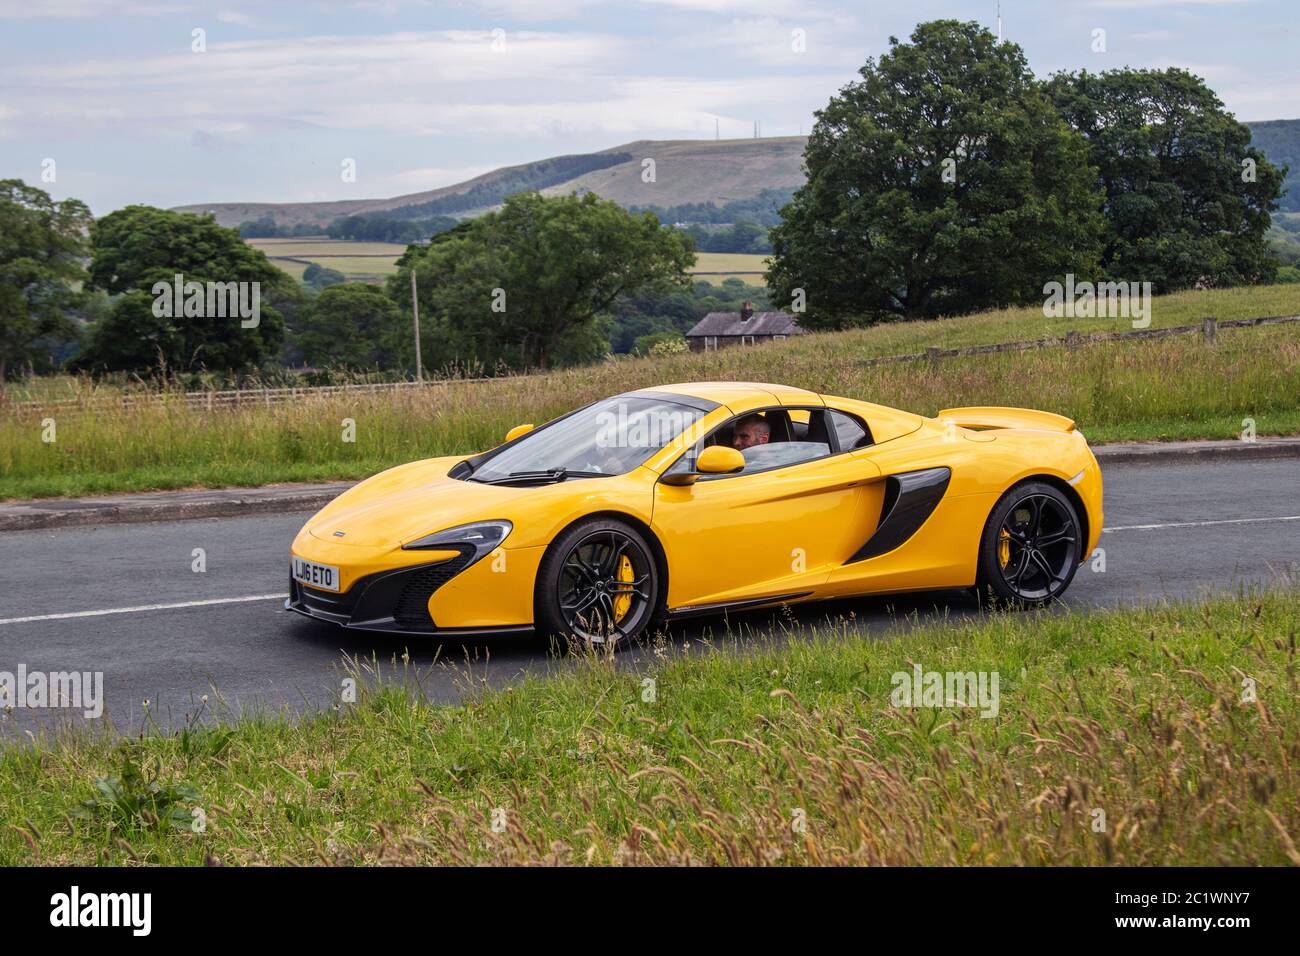 16 Yellow Mclaren 675lt Spider Vehicular Traffic Moving Vehicles Supercar Driving Vehicle On Uk Roads Stock Photo Alamy